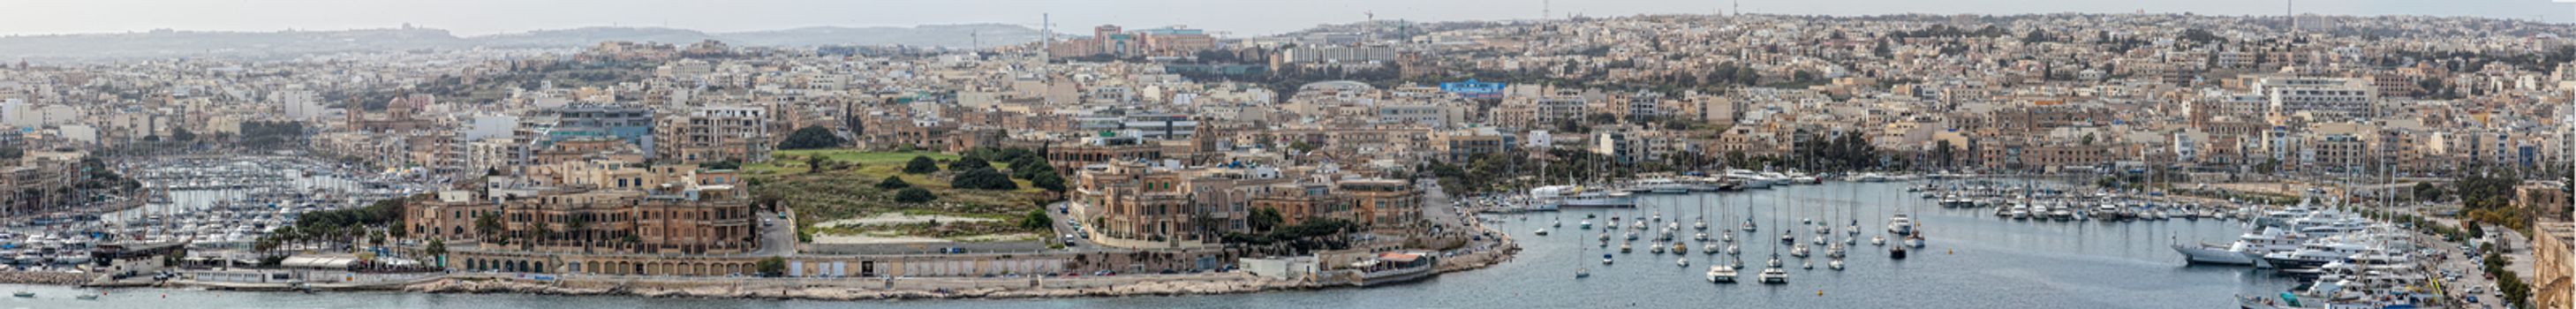 A panoramic view of Ta' Xbiex point, as seen from Hastings Gardens in Valletta.